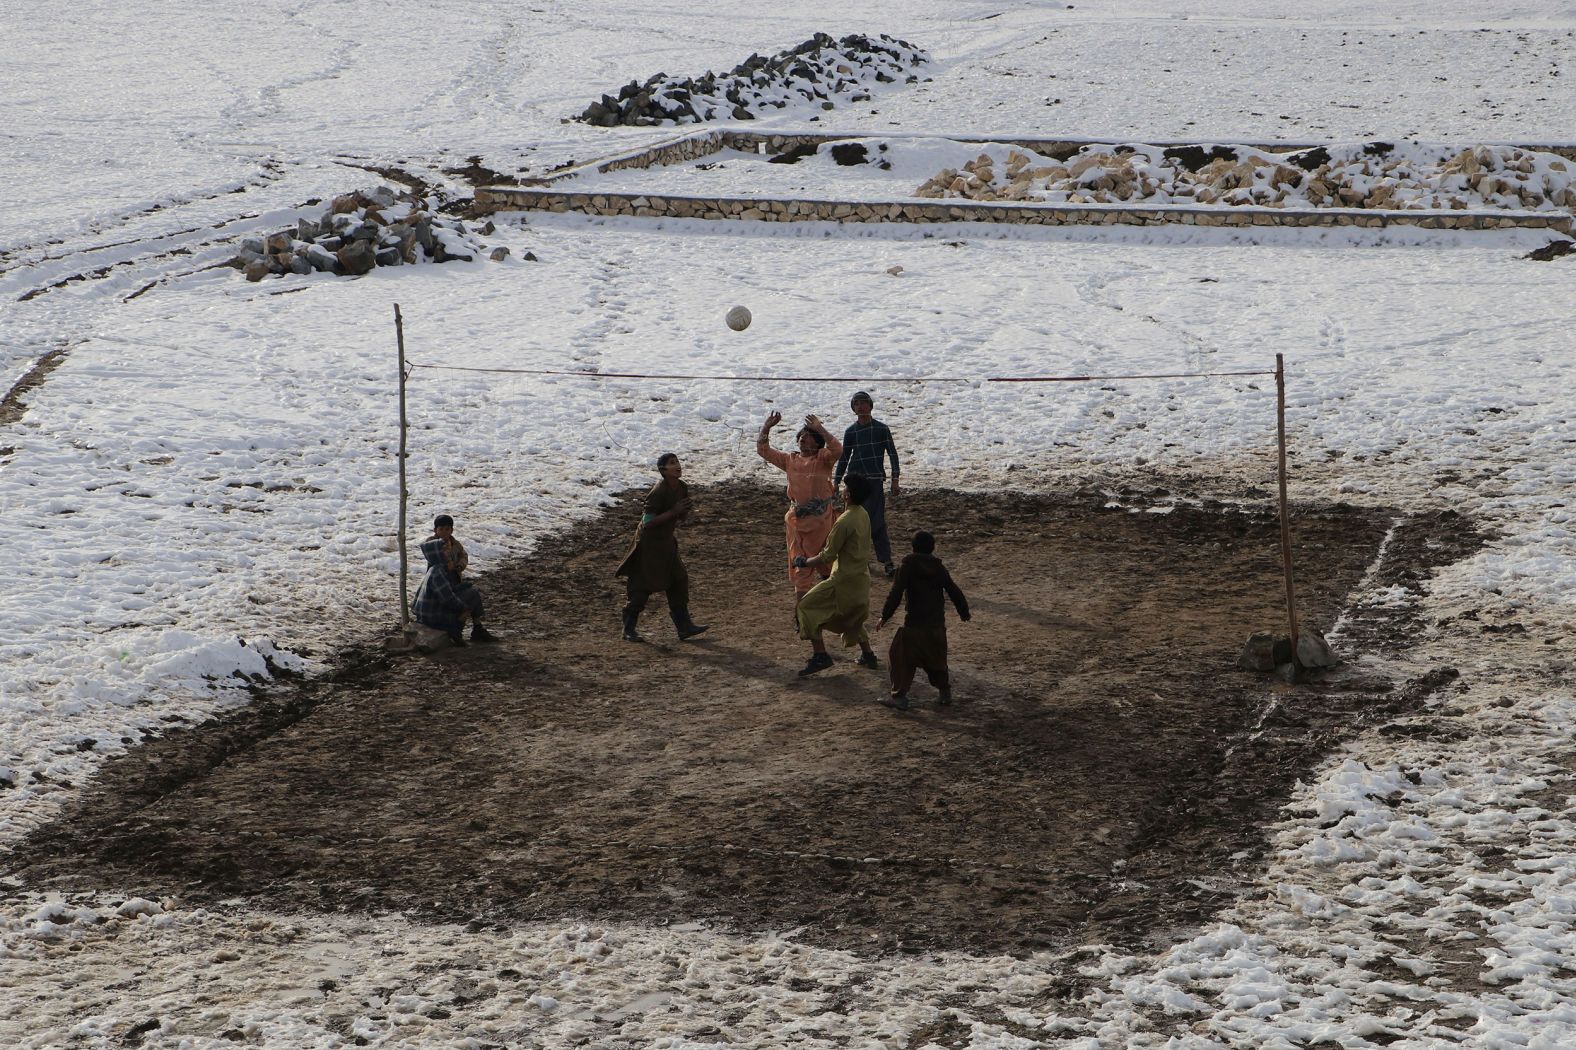 People play volleyball in Badakhshan, Afghanistan, on Wednesday, January 18. <a href="index.php?page=&url=https%3A%2F%2Fwww.cnn.com%2F2023%2F01%2F12%2Fworld%2Fgallery%2Fphotos-this-week-january-5-january-12%2Findex.html" target="_blank">See the last week in 34 photos.</a>